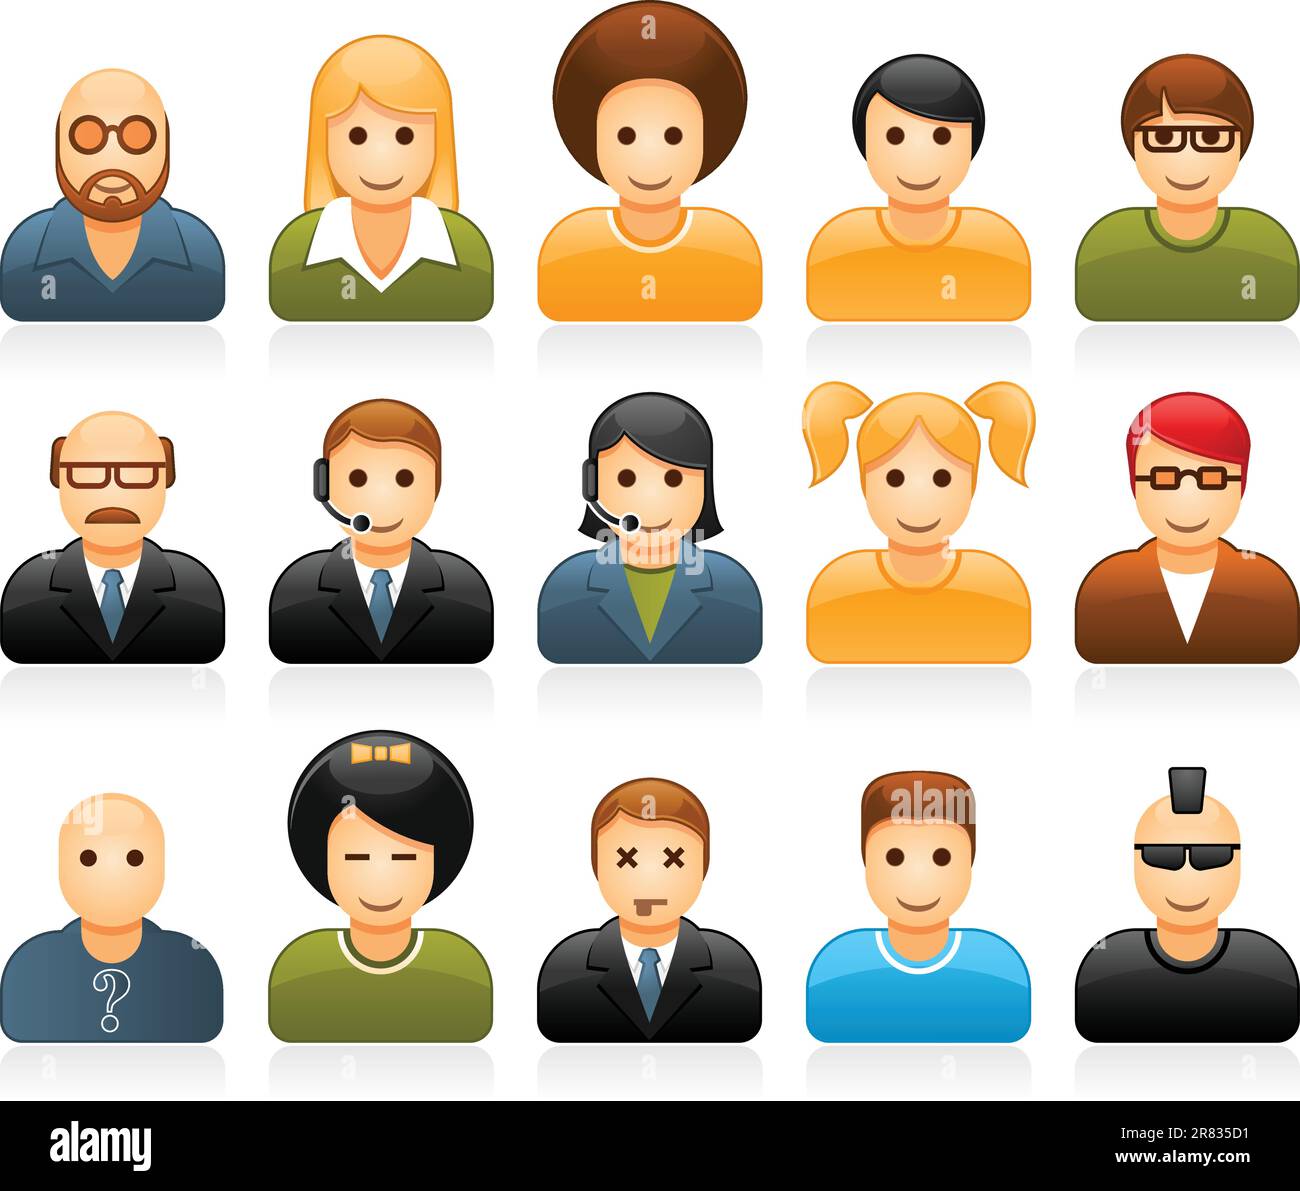 Glossy people avatars with different style and hairdo Stock Vector